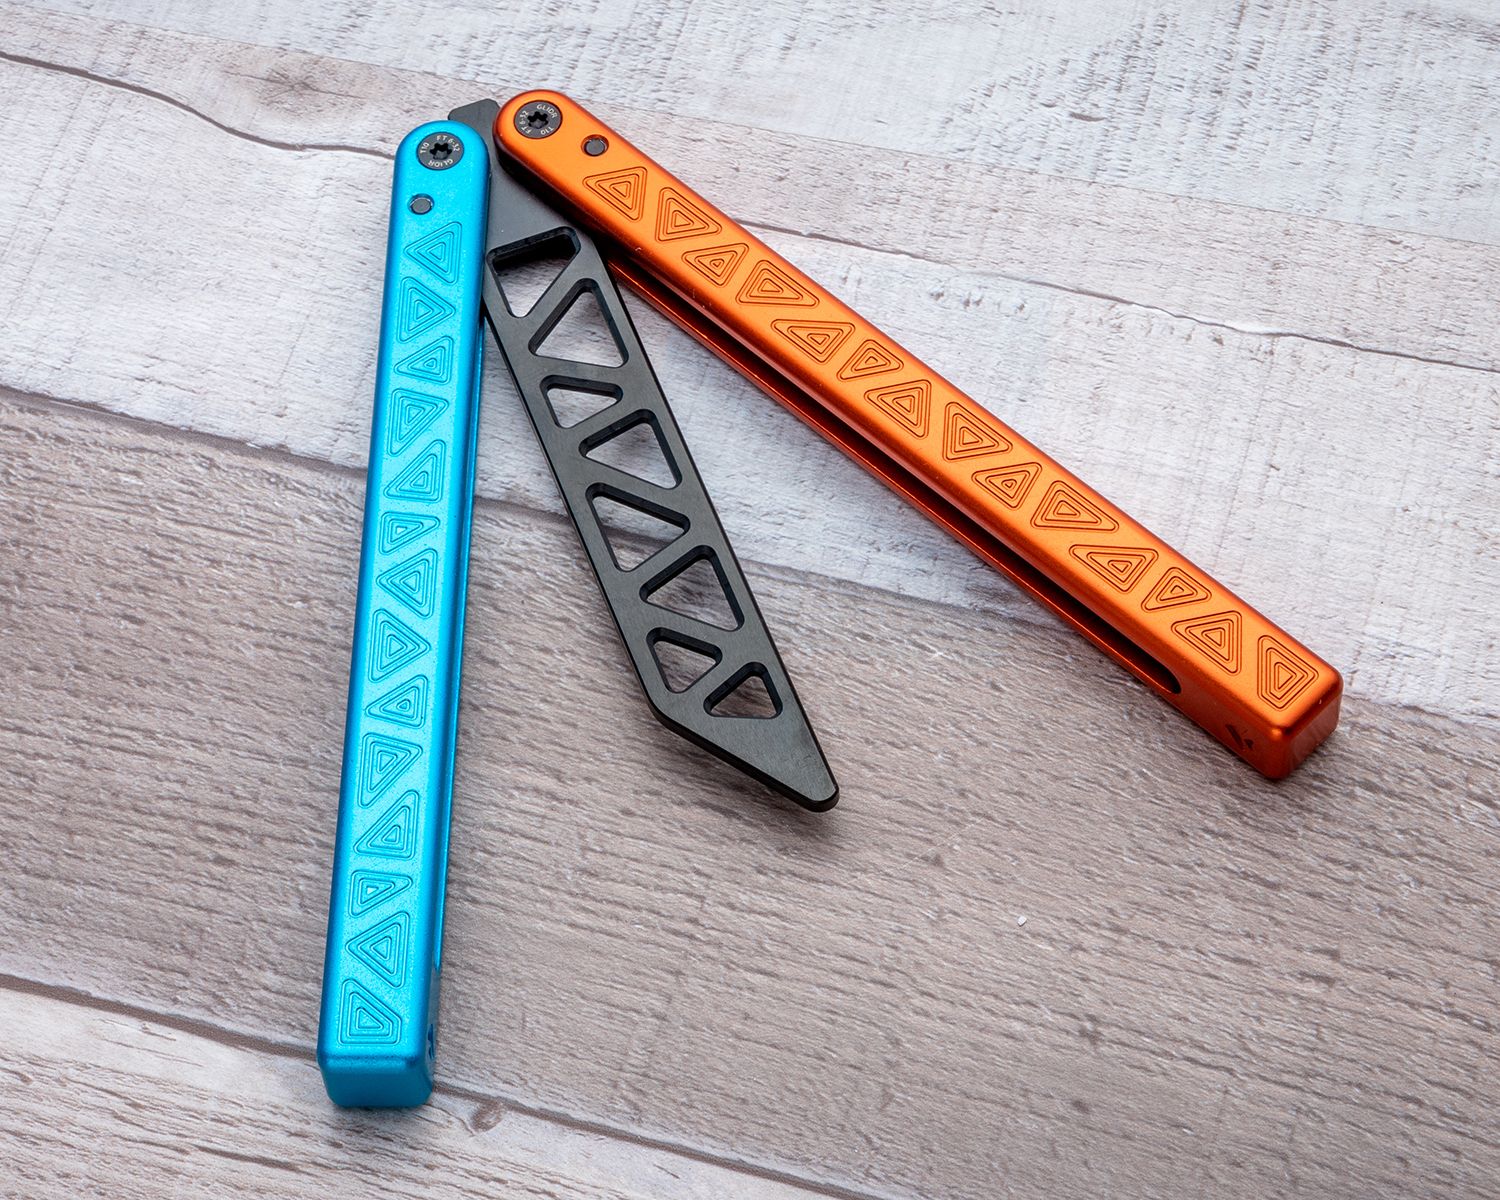 Glidr Original 4 Fire & Ice Balisong Butterfly Trainer 4.8 